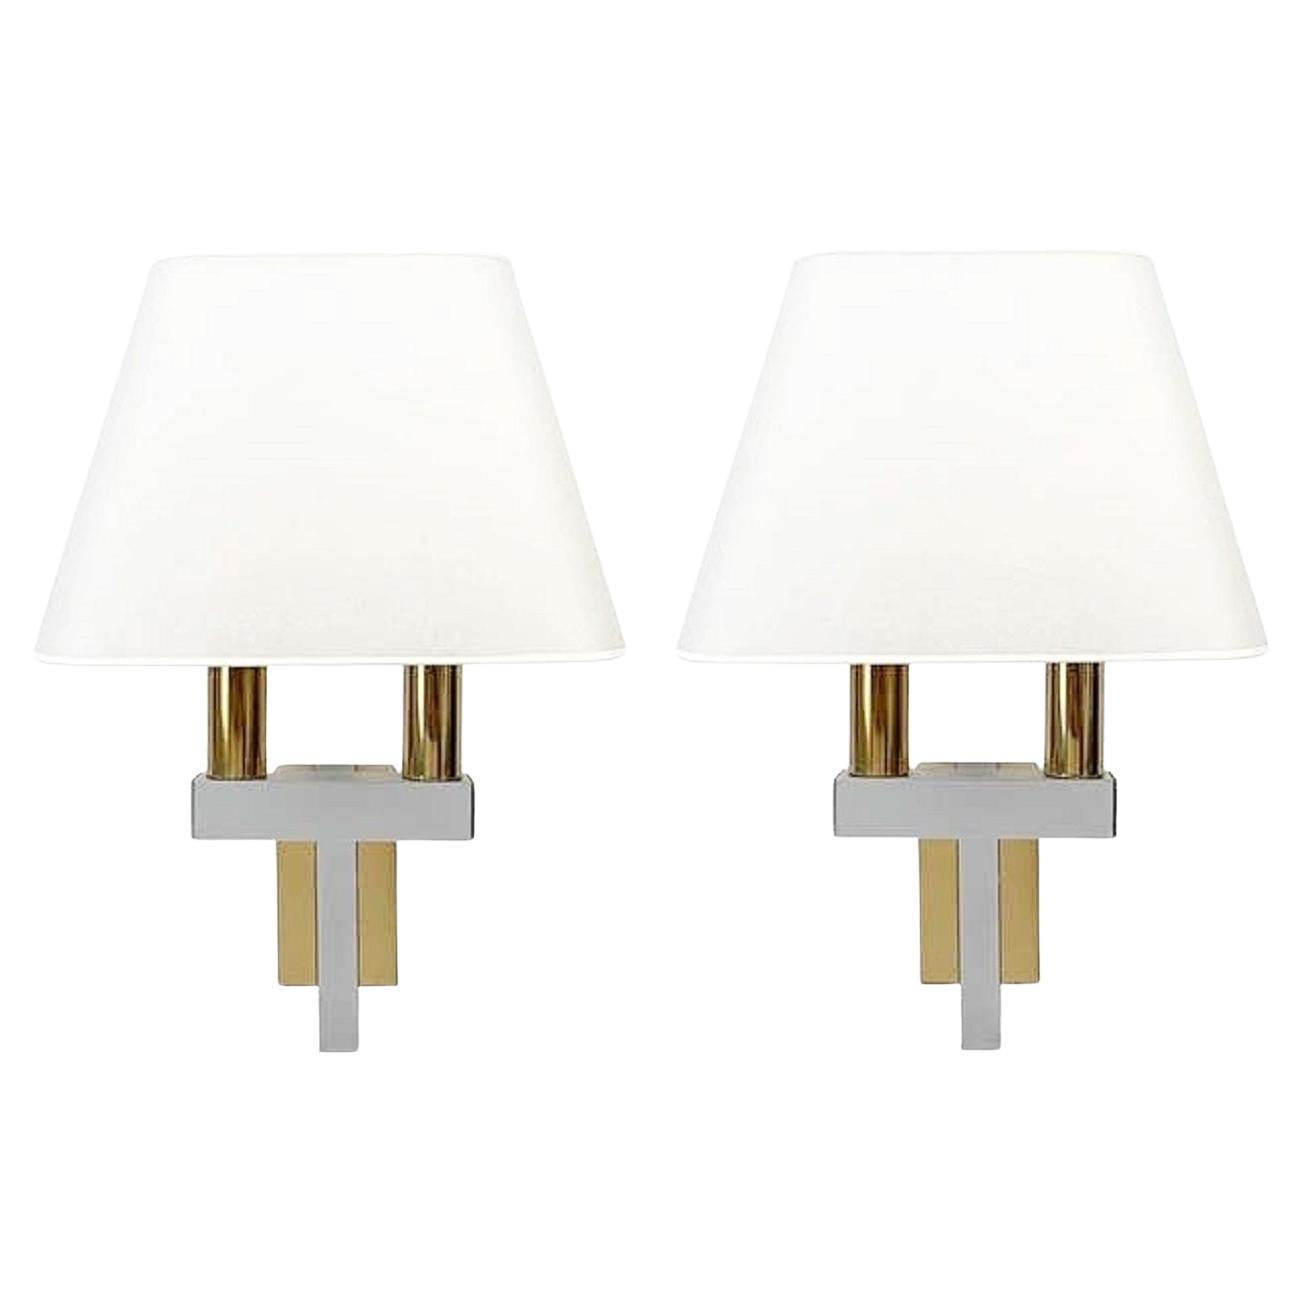 Pair of Chrome and Brass Wall Lights in the Style of Willy Rizzo, 21 Pairs